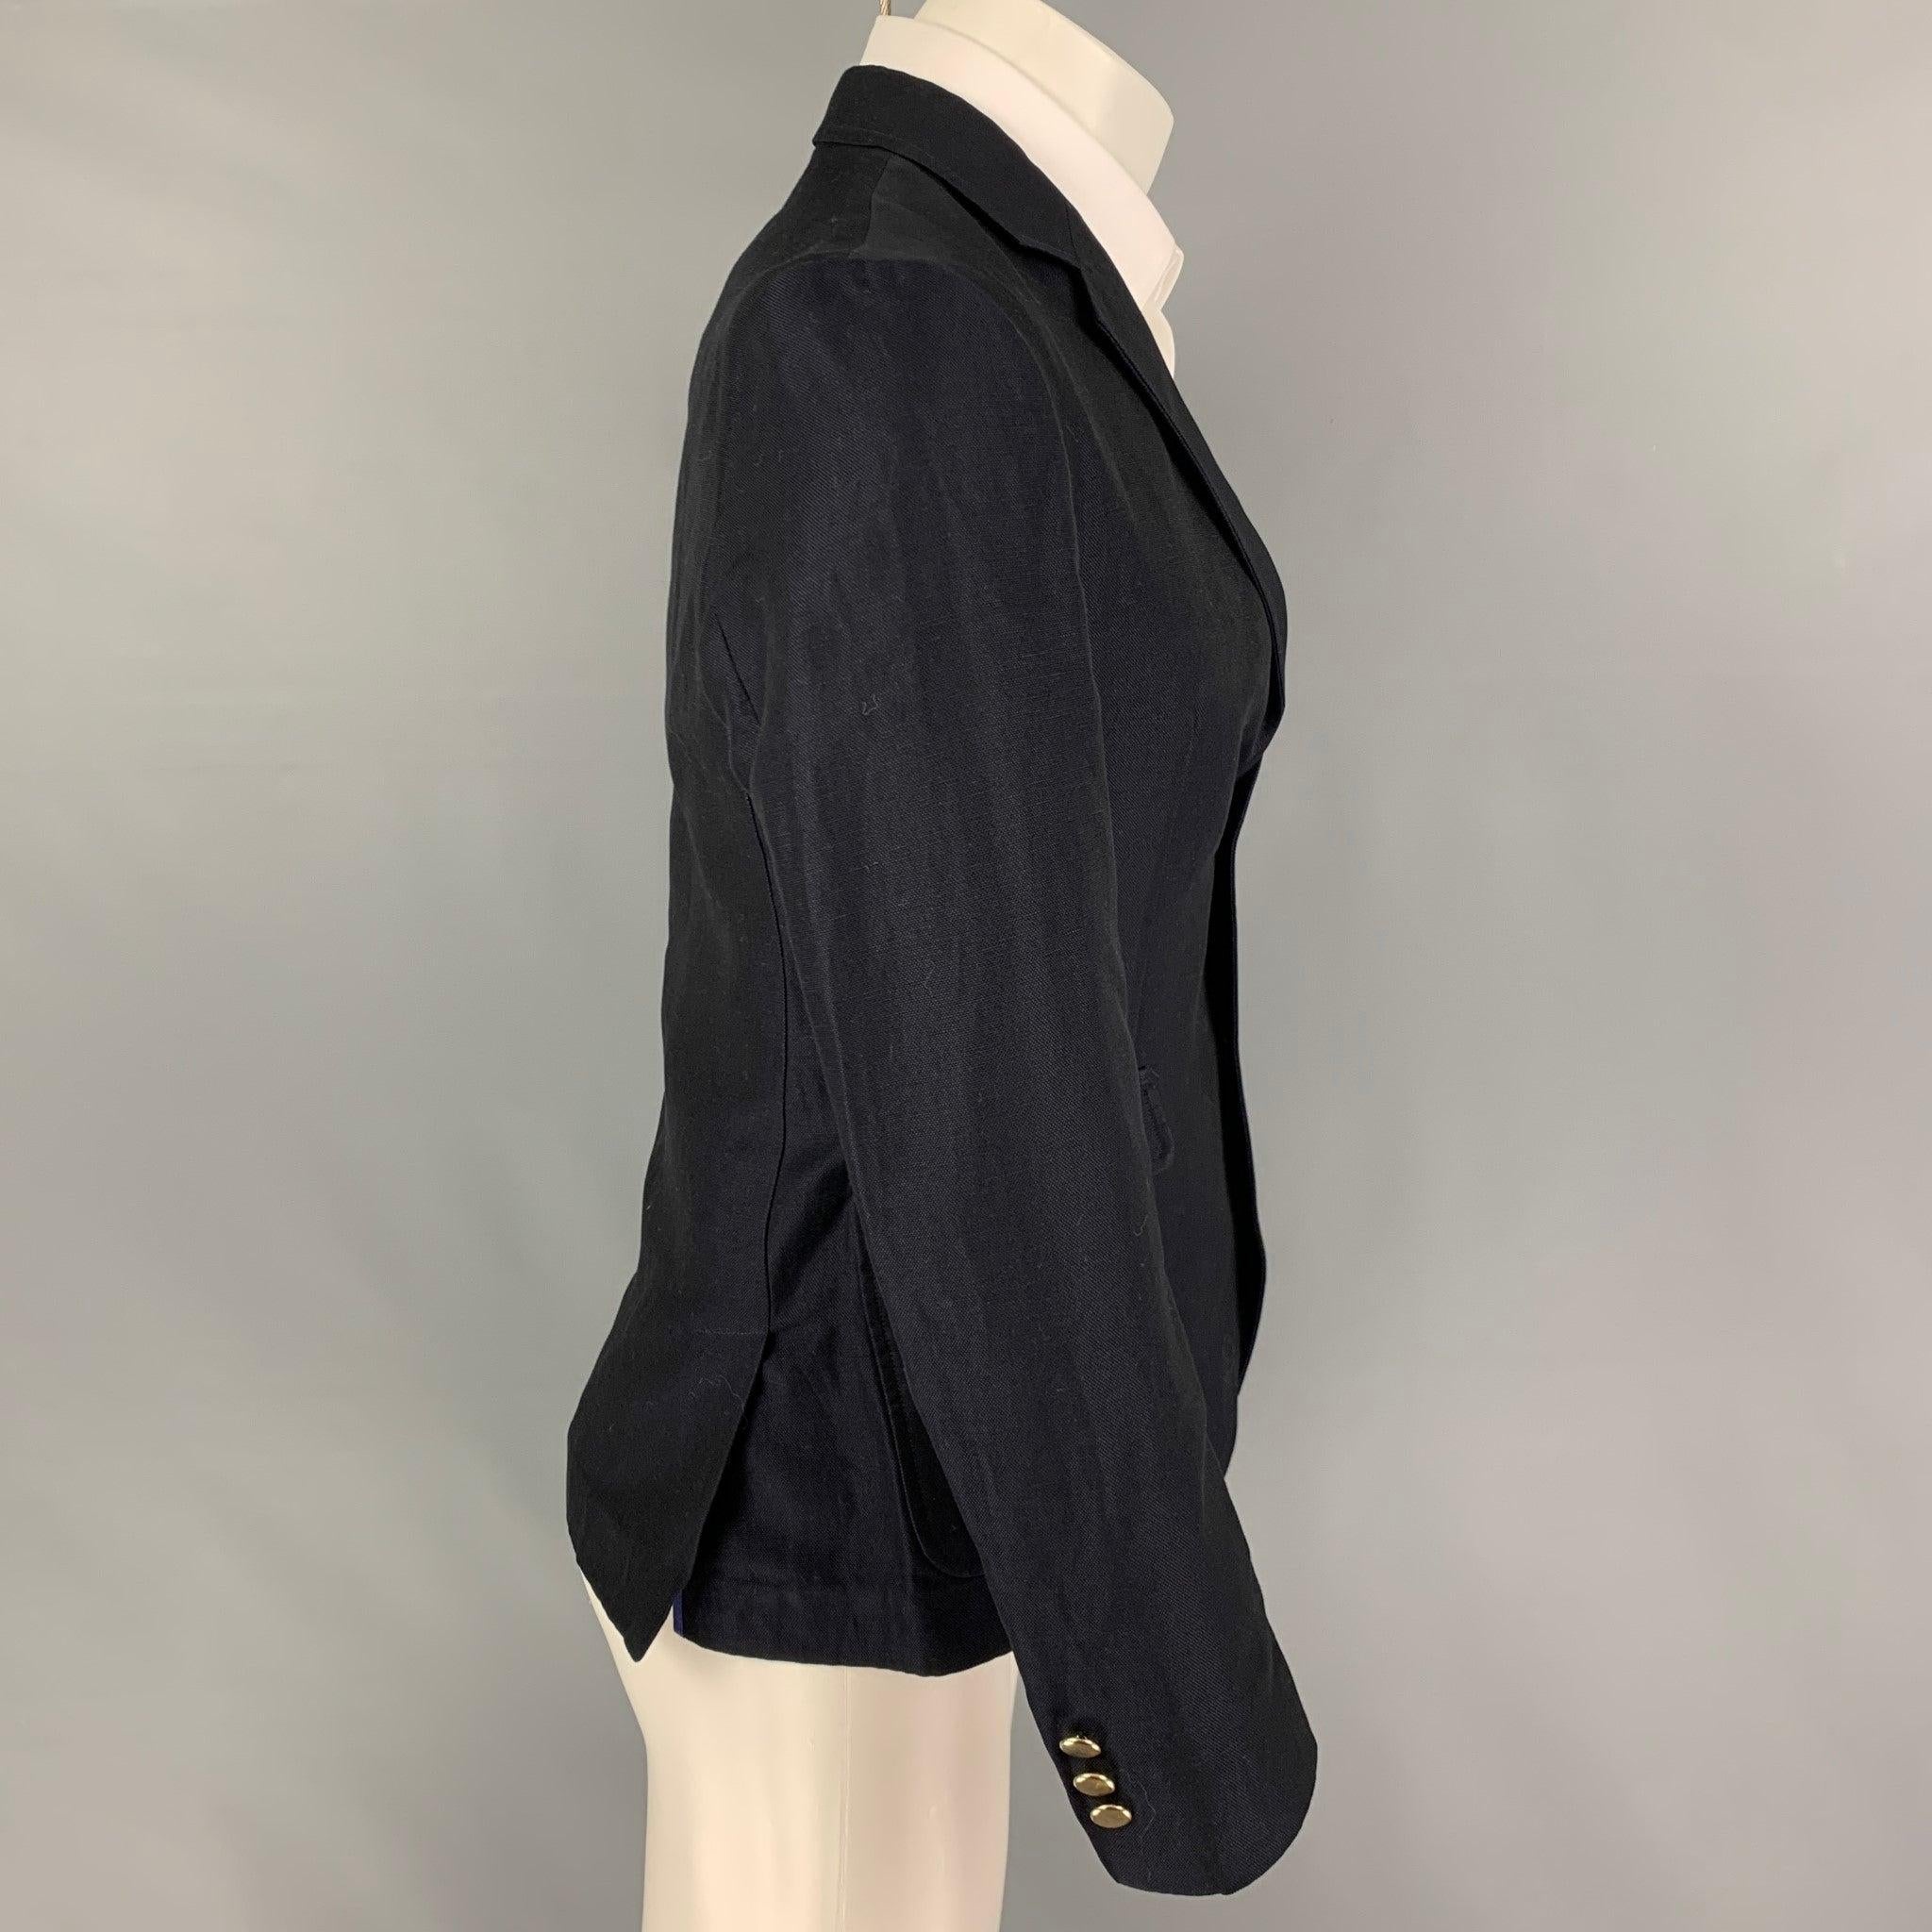 BAND OF OUTSIDERS
sport coat comes in a navy linen with a half liner featuring a notch lapel, flap pockets, double back vent, and a three button closure.Good Pre-Owned Condition. Missing one button. As-is.  

Marked:   1 

Measurements: 
 
Shoulder: